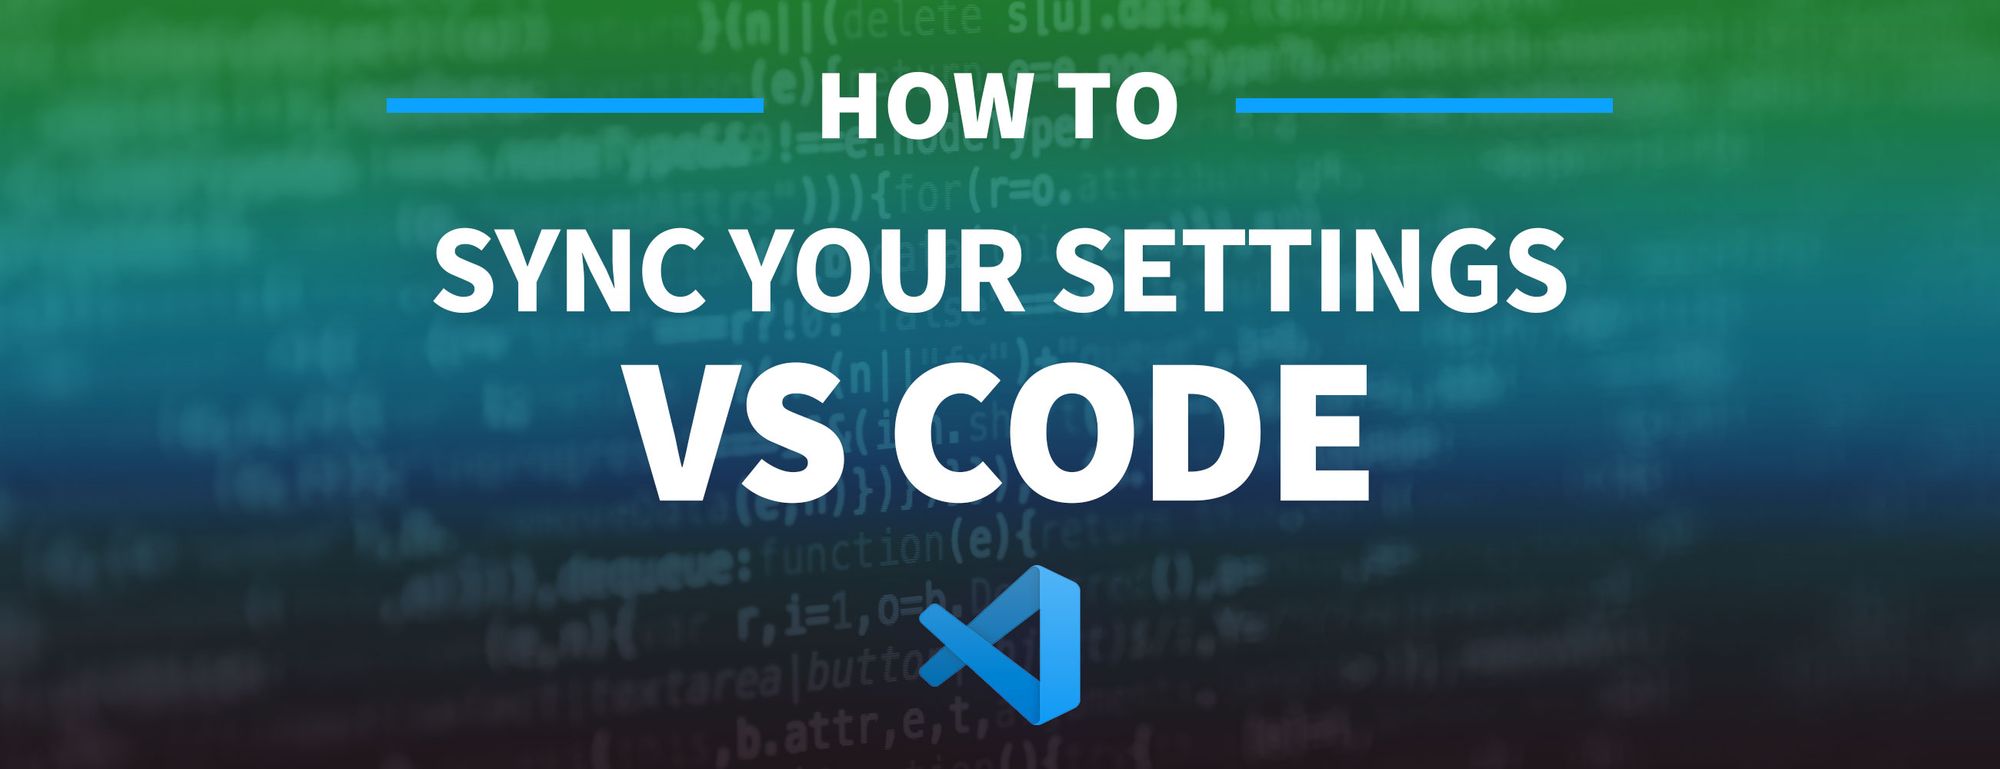 how-to-sync-vs-code-settings-between-multiple-devices-and-environments-laptrinhx